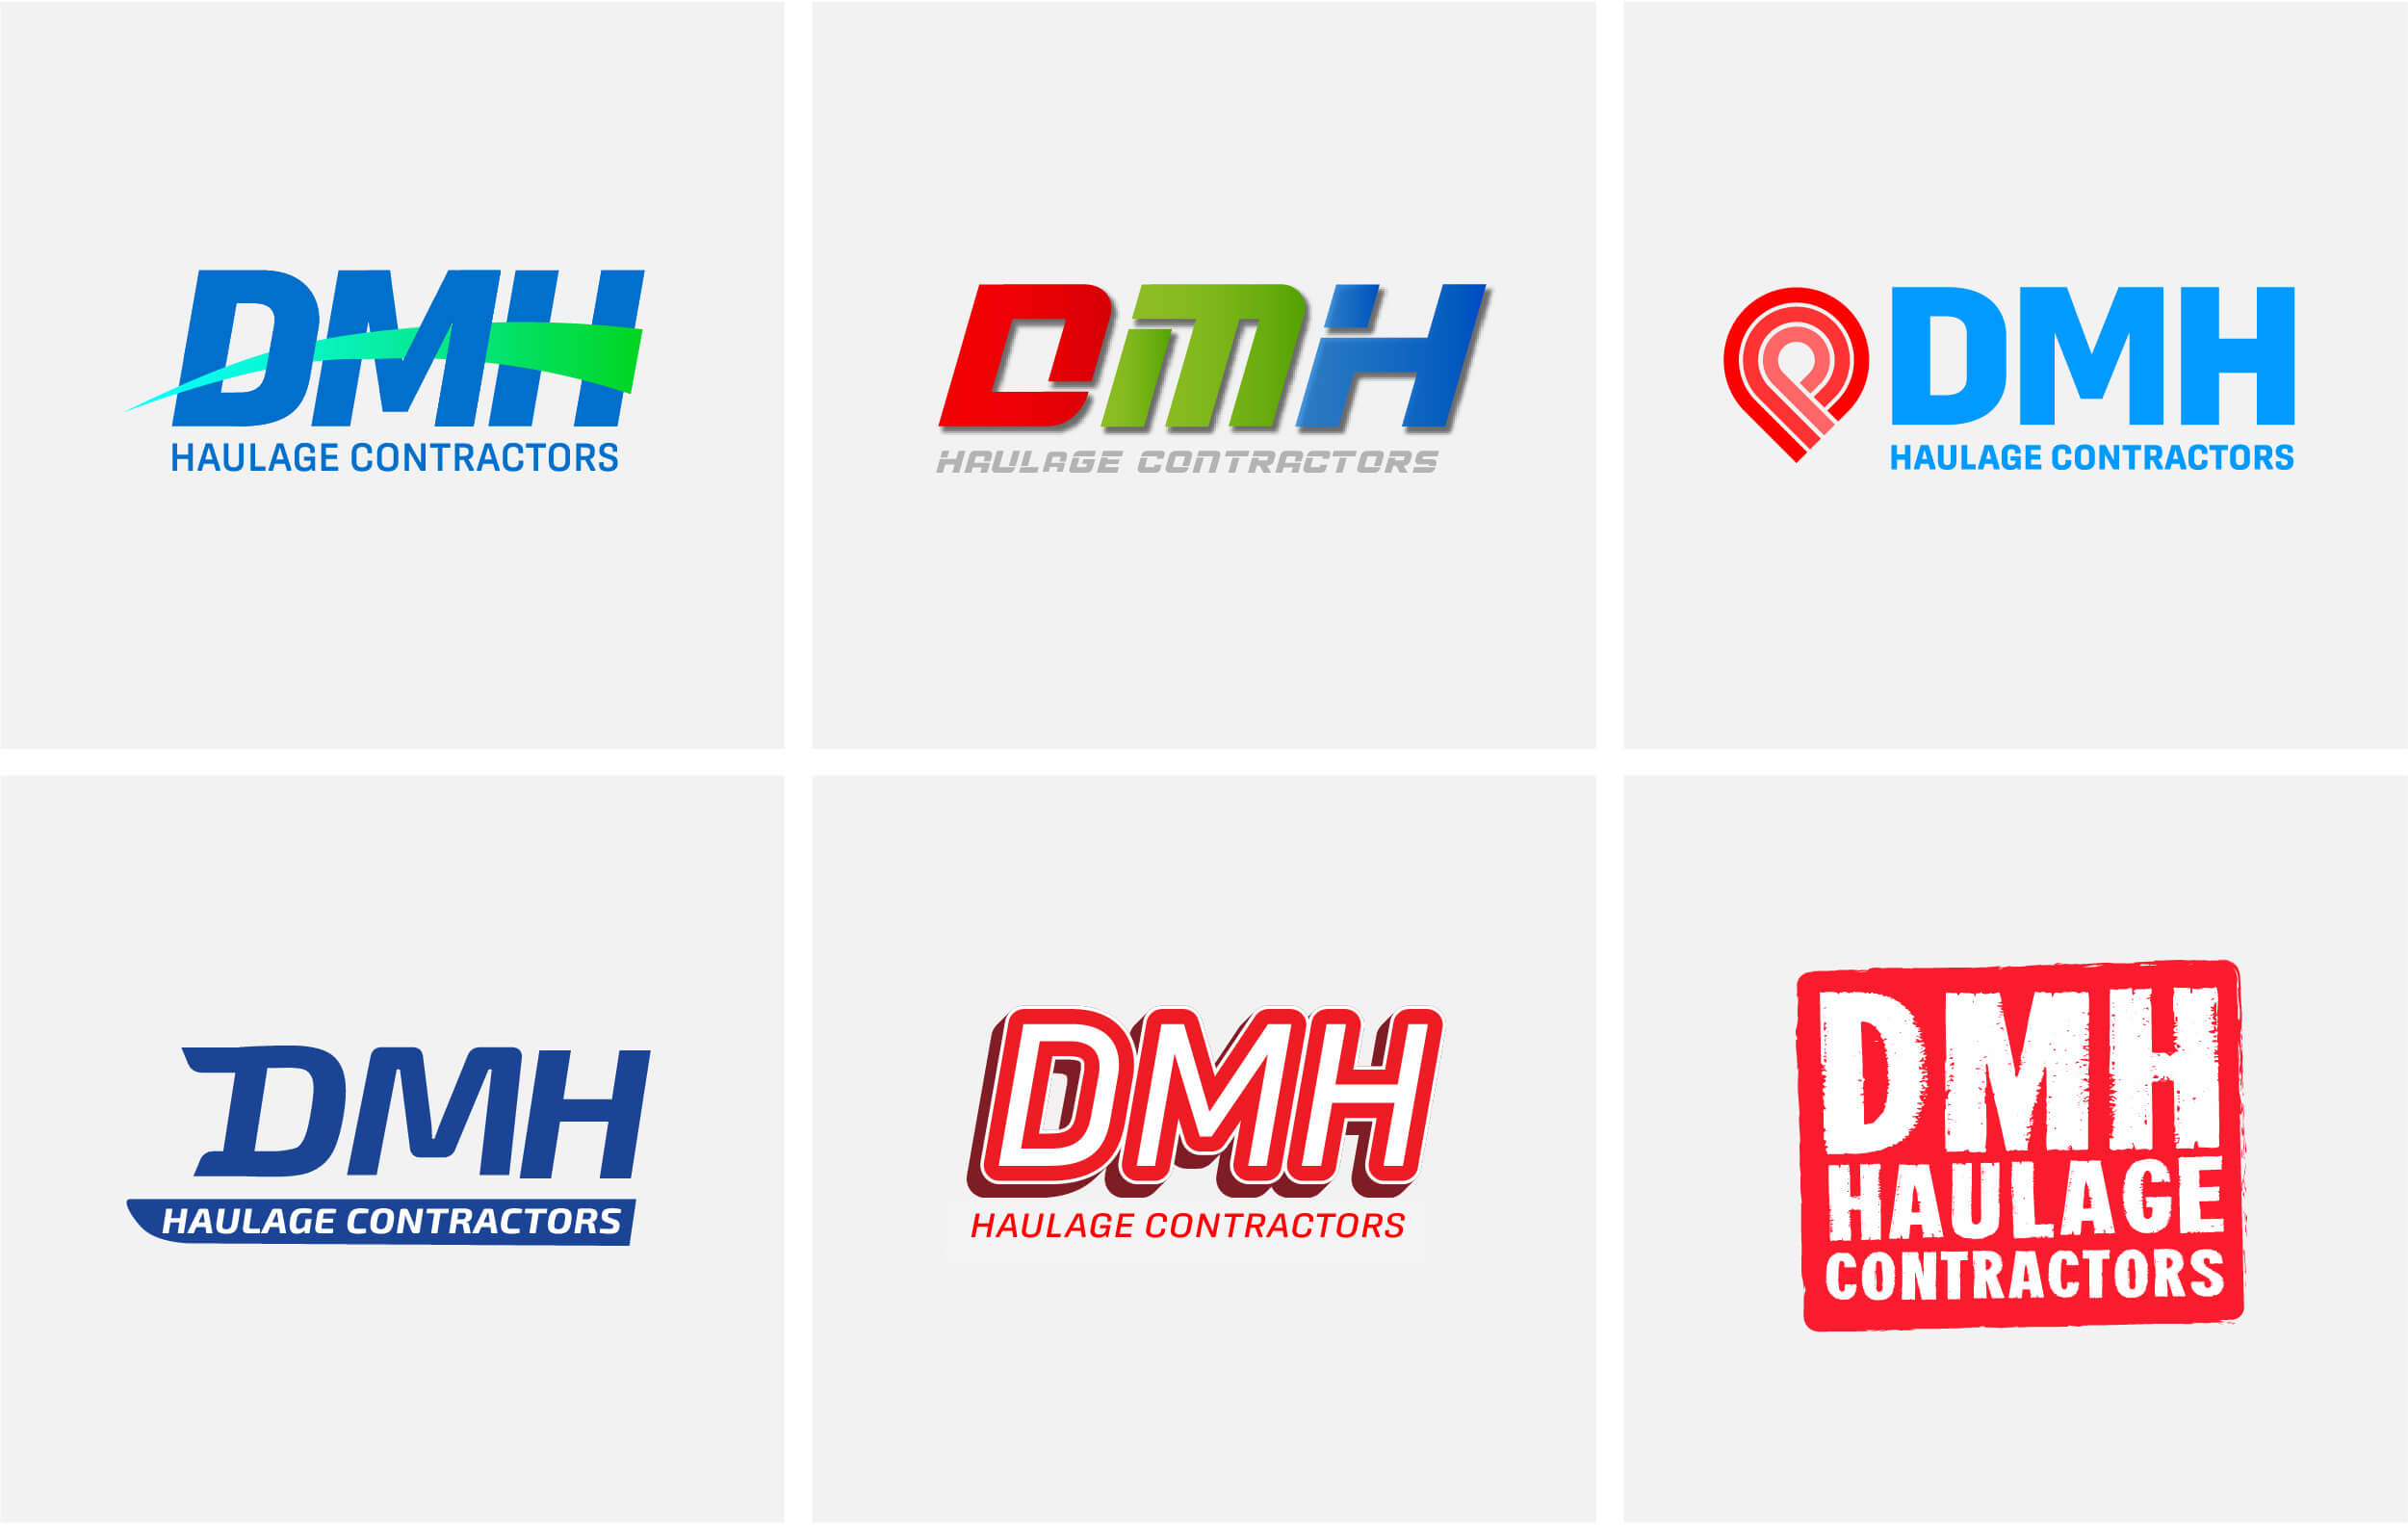 A variety of logo designs for DMH Haulage Contractors